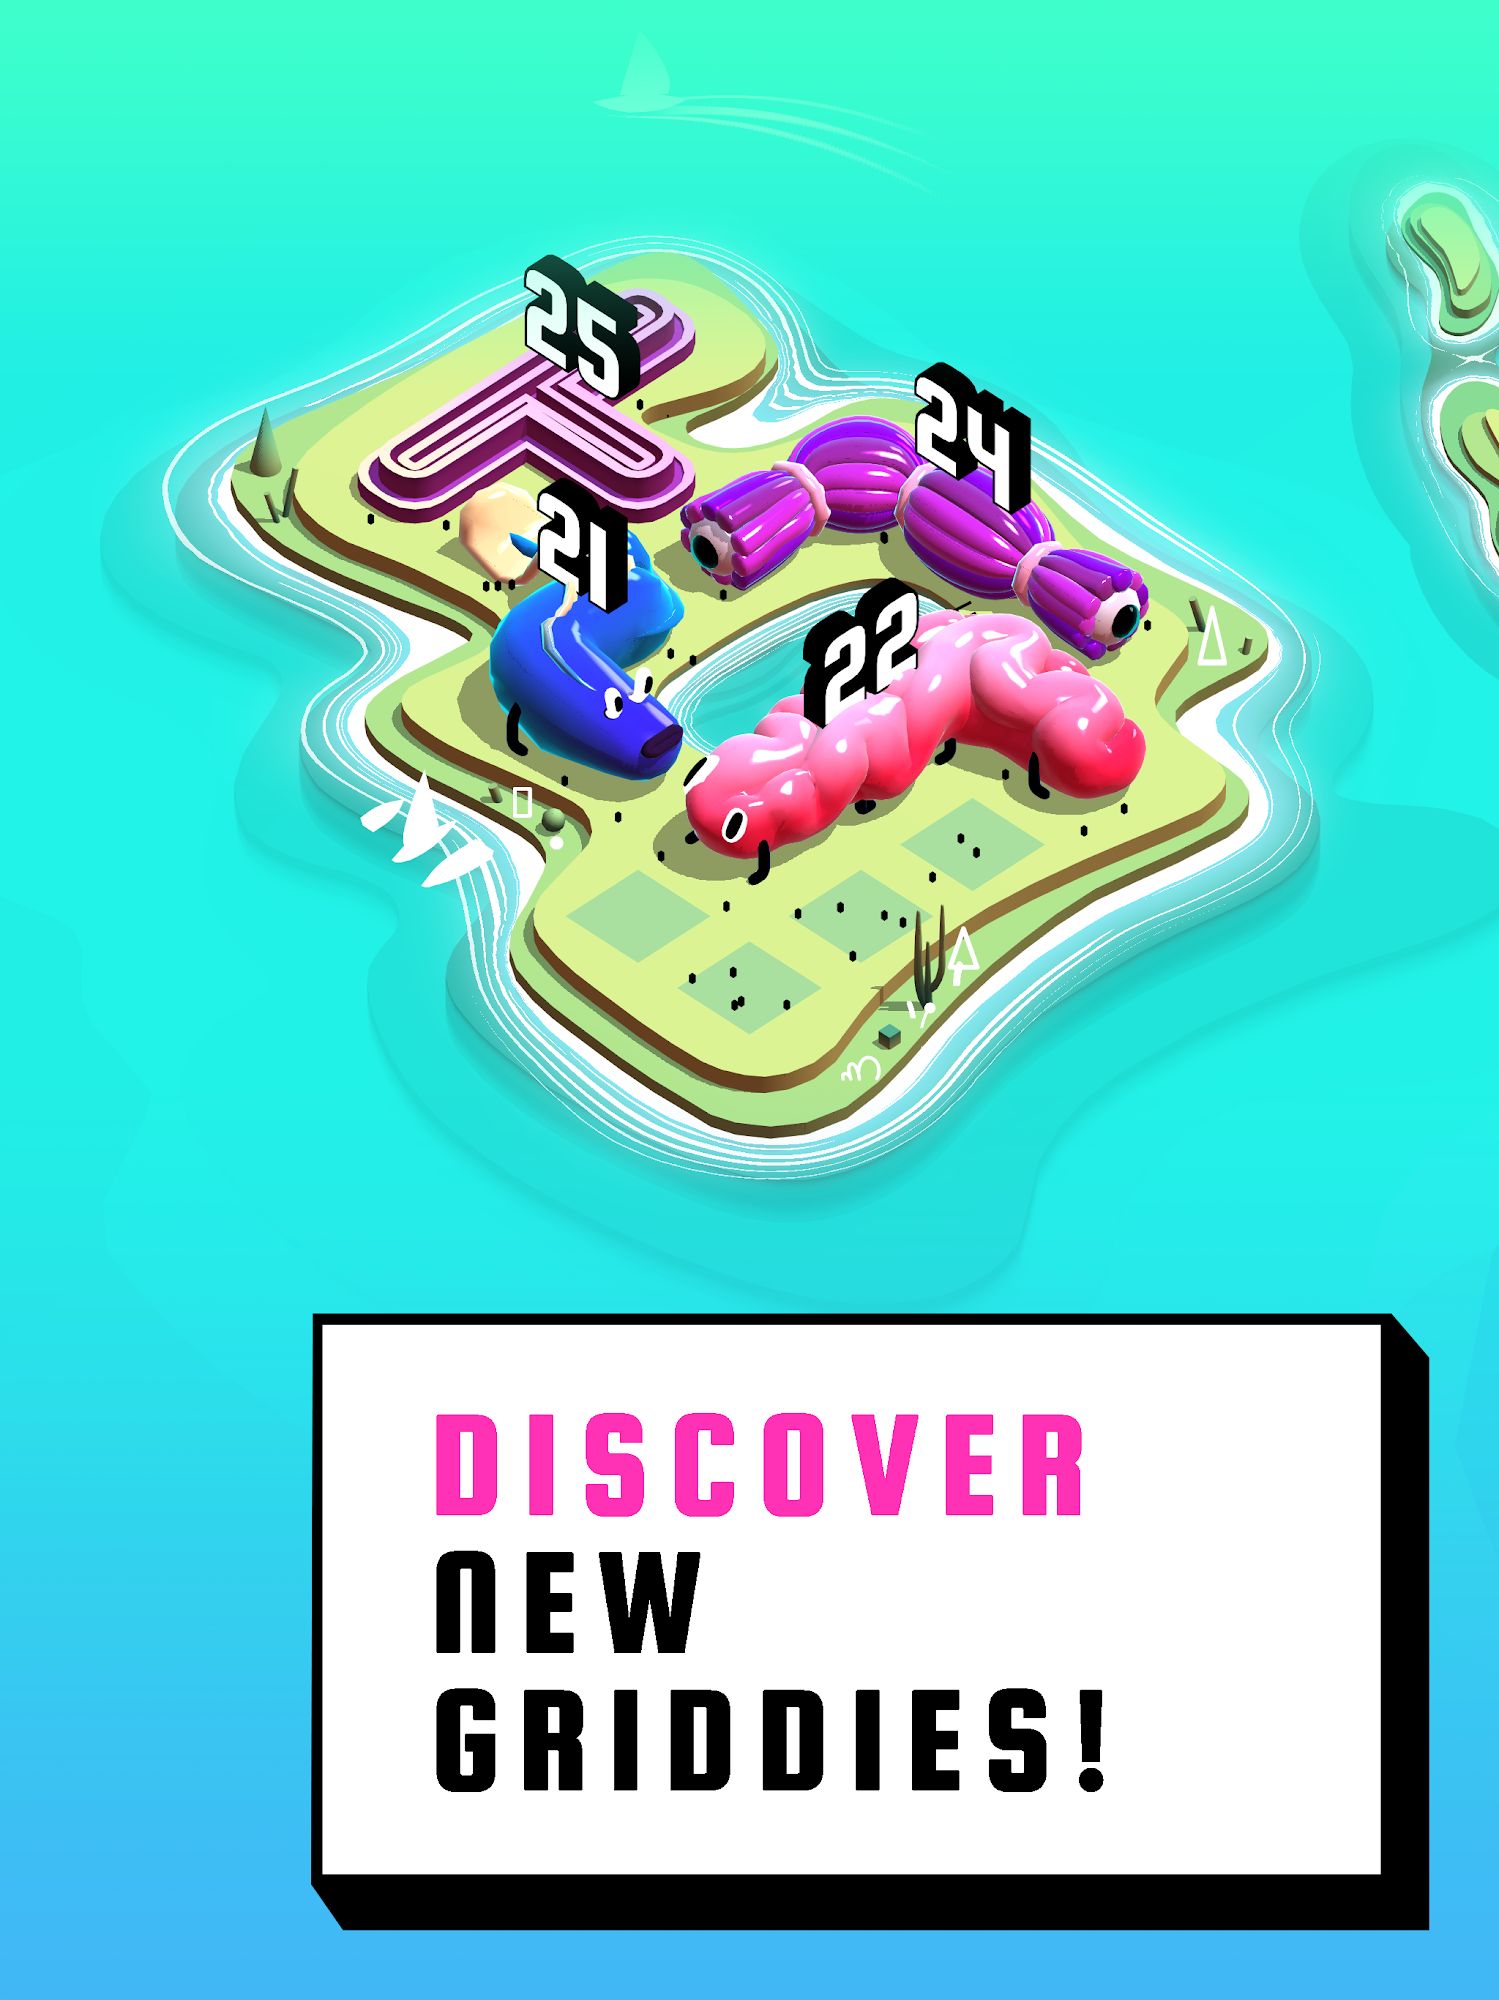 Gameplay of the Griddie Islands for Android phone or tablet.